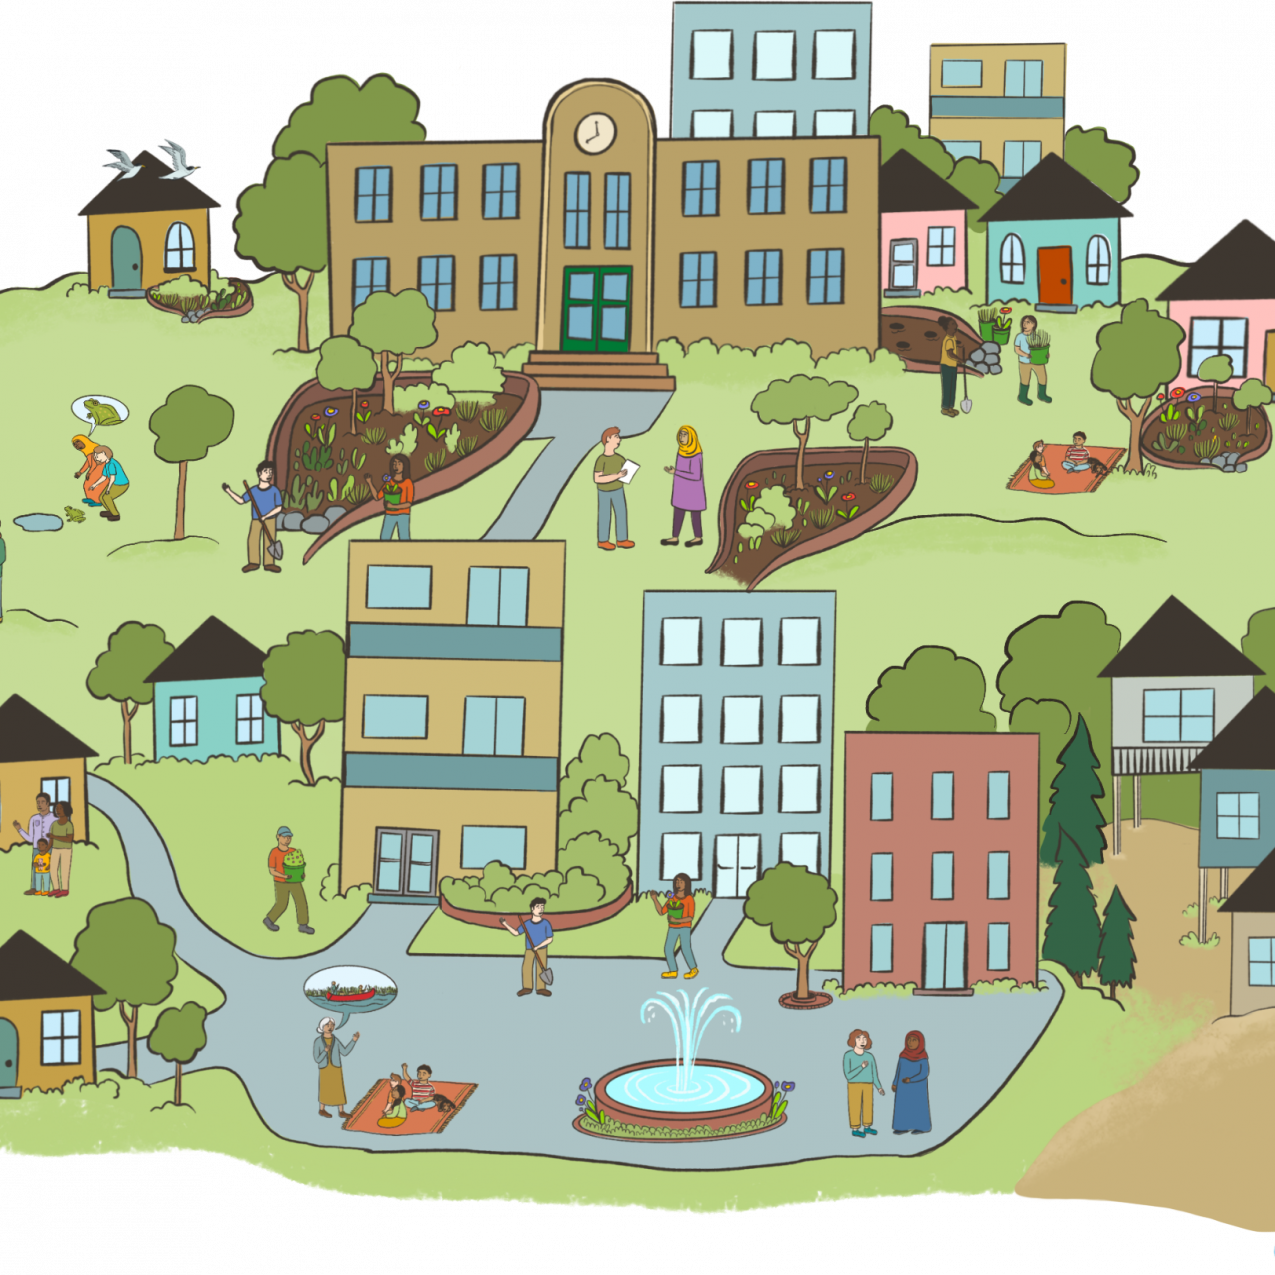 Theory of Change community illustration, which includes lush greenery, people playing and conversing outside, and community buildings and houses.